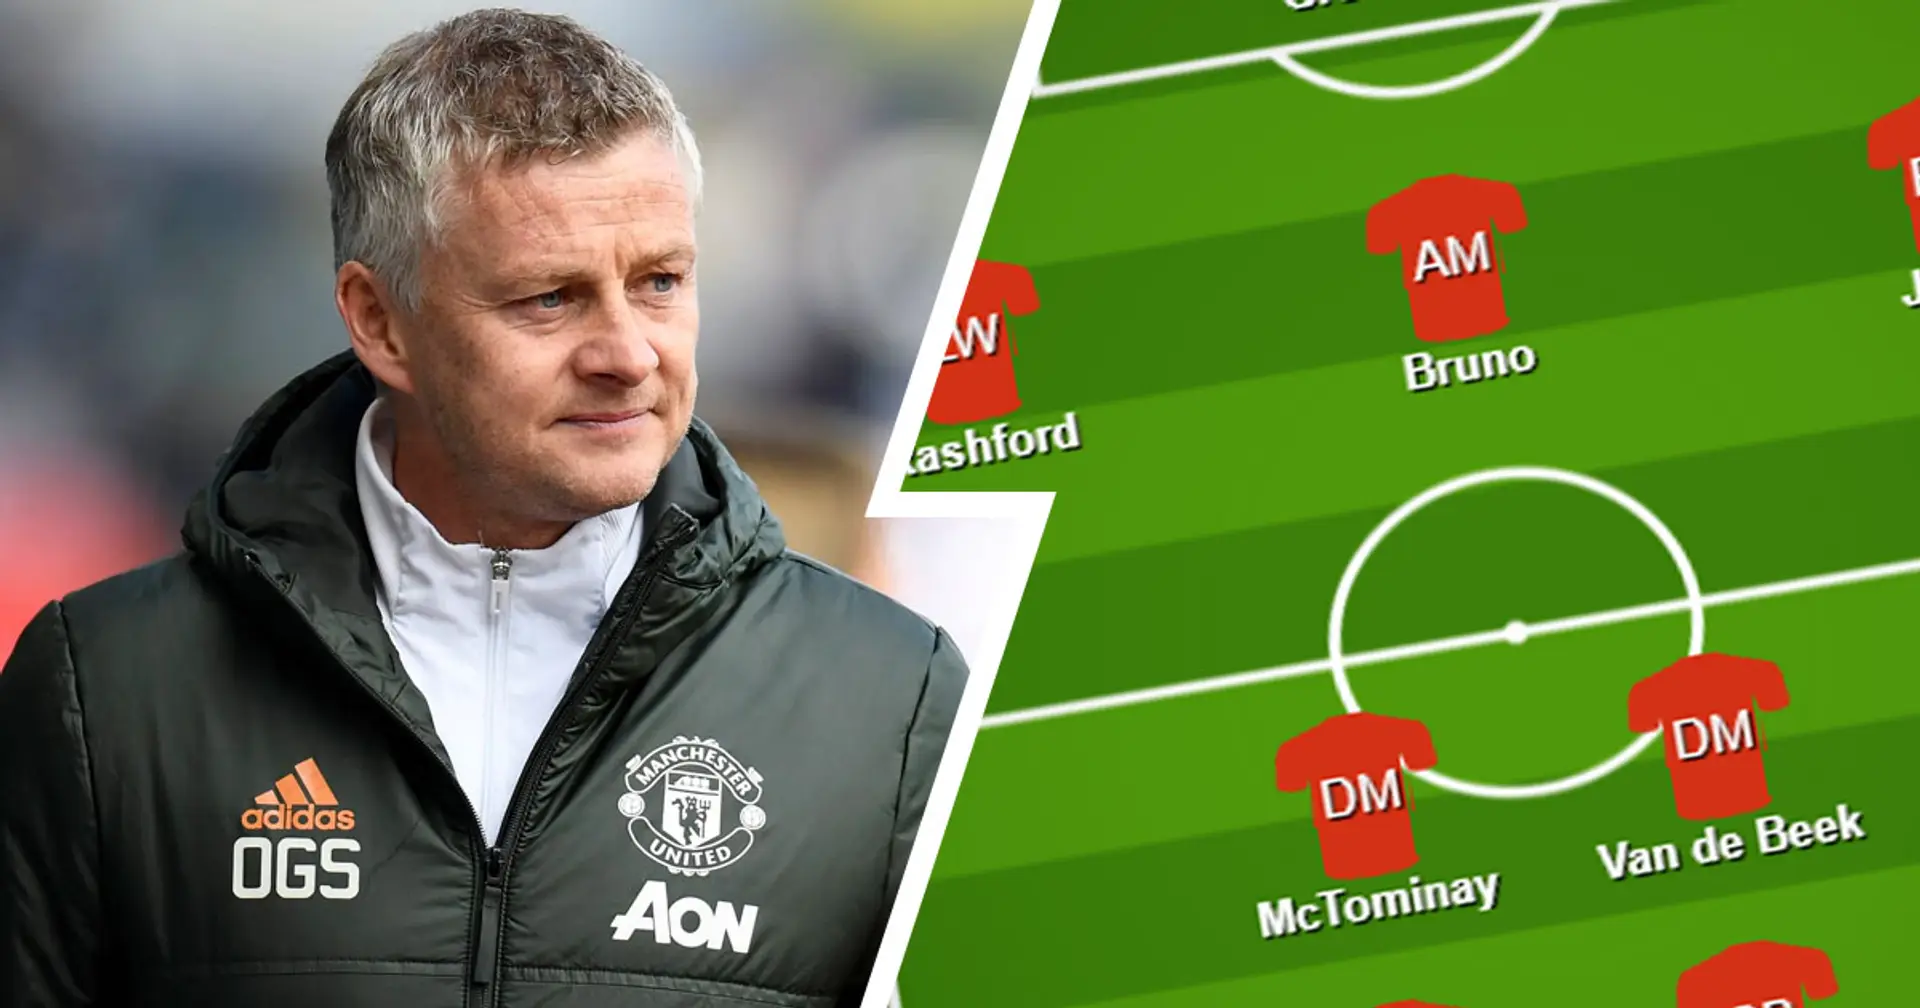 Van de Beek to start? Select your favourite United XI vs AS Roma from 2 options